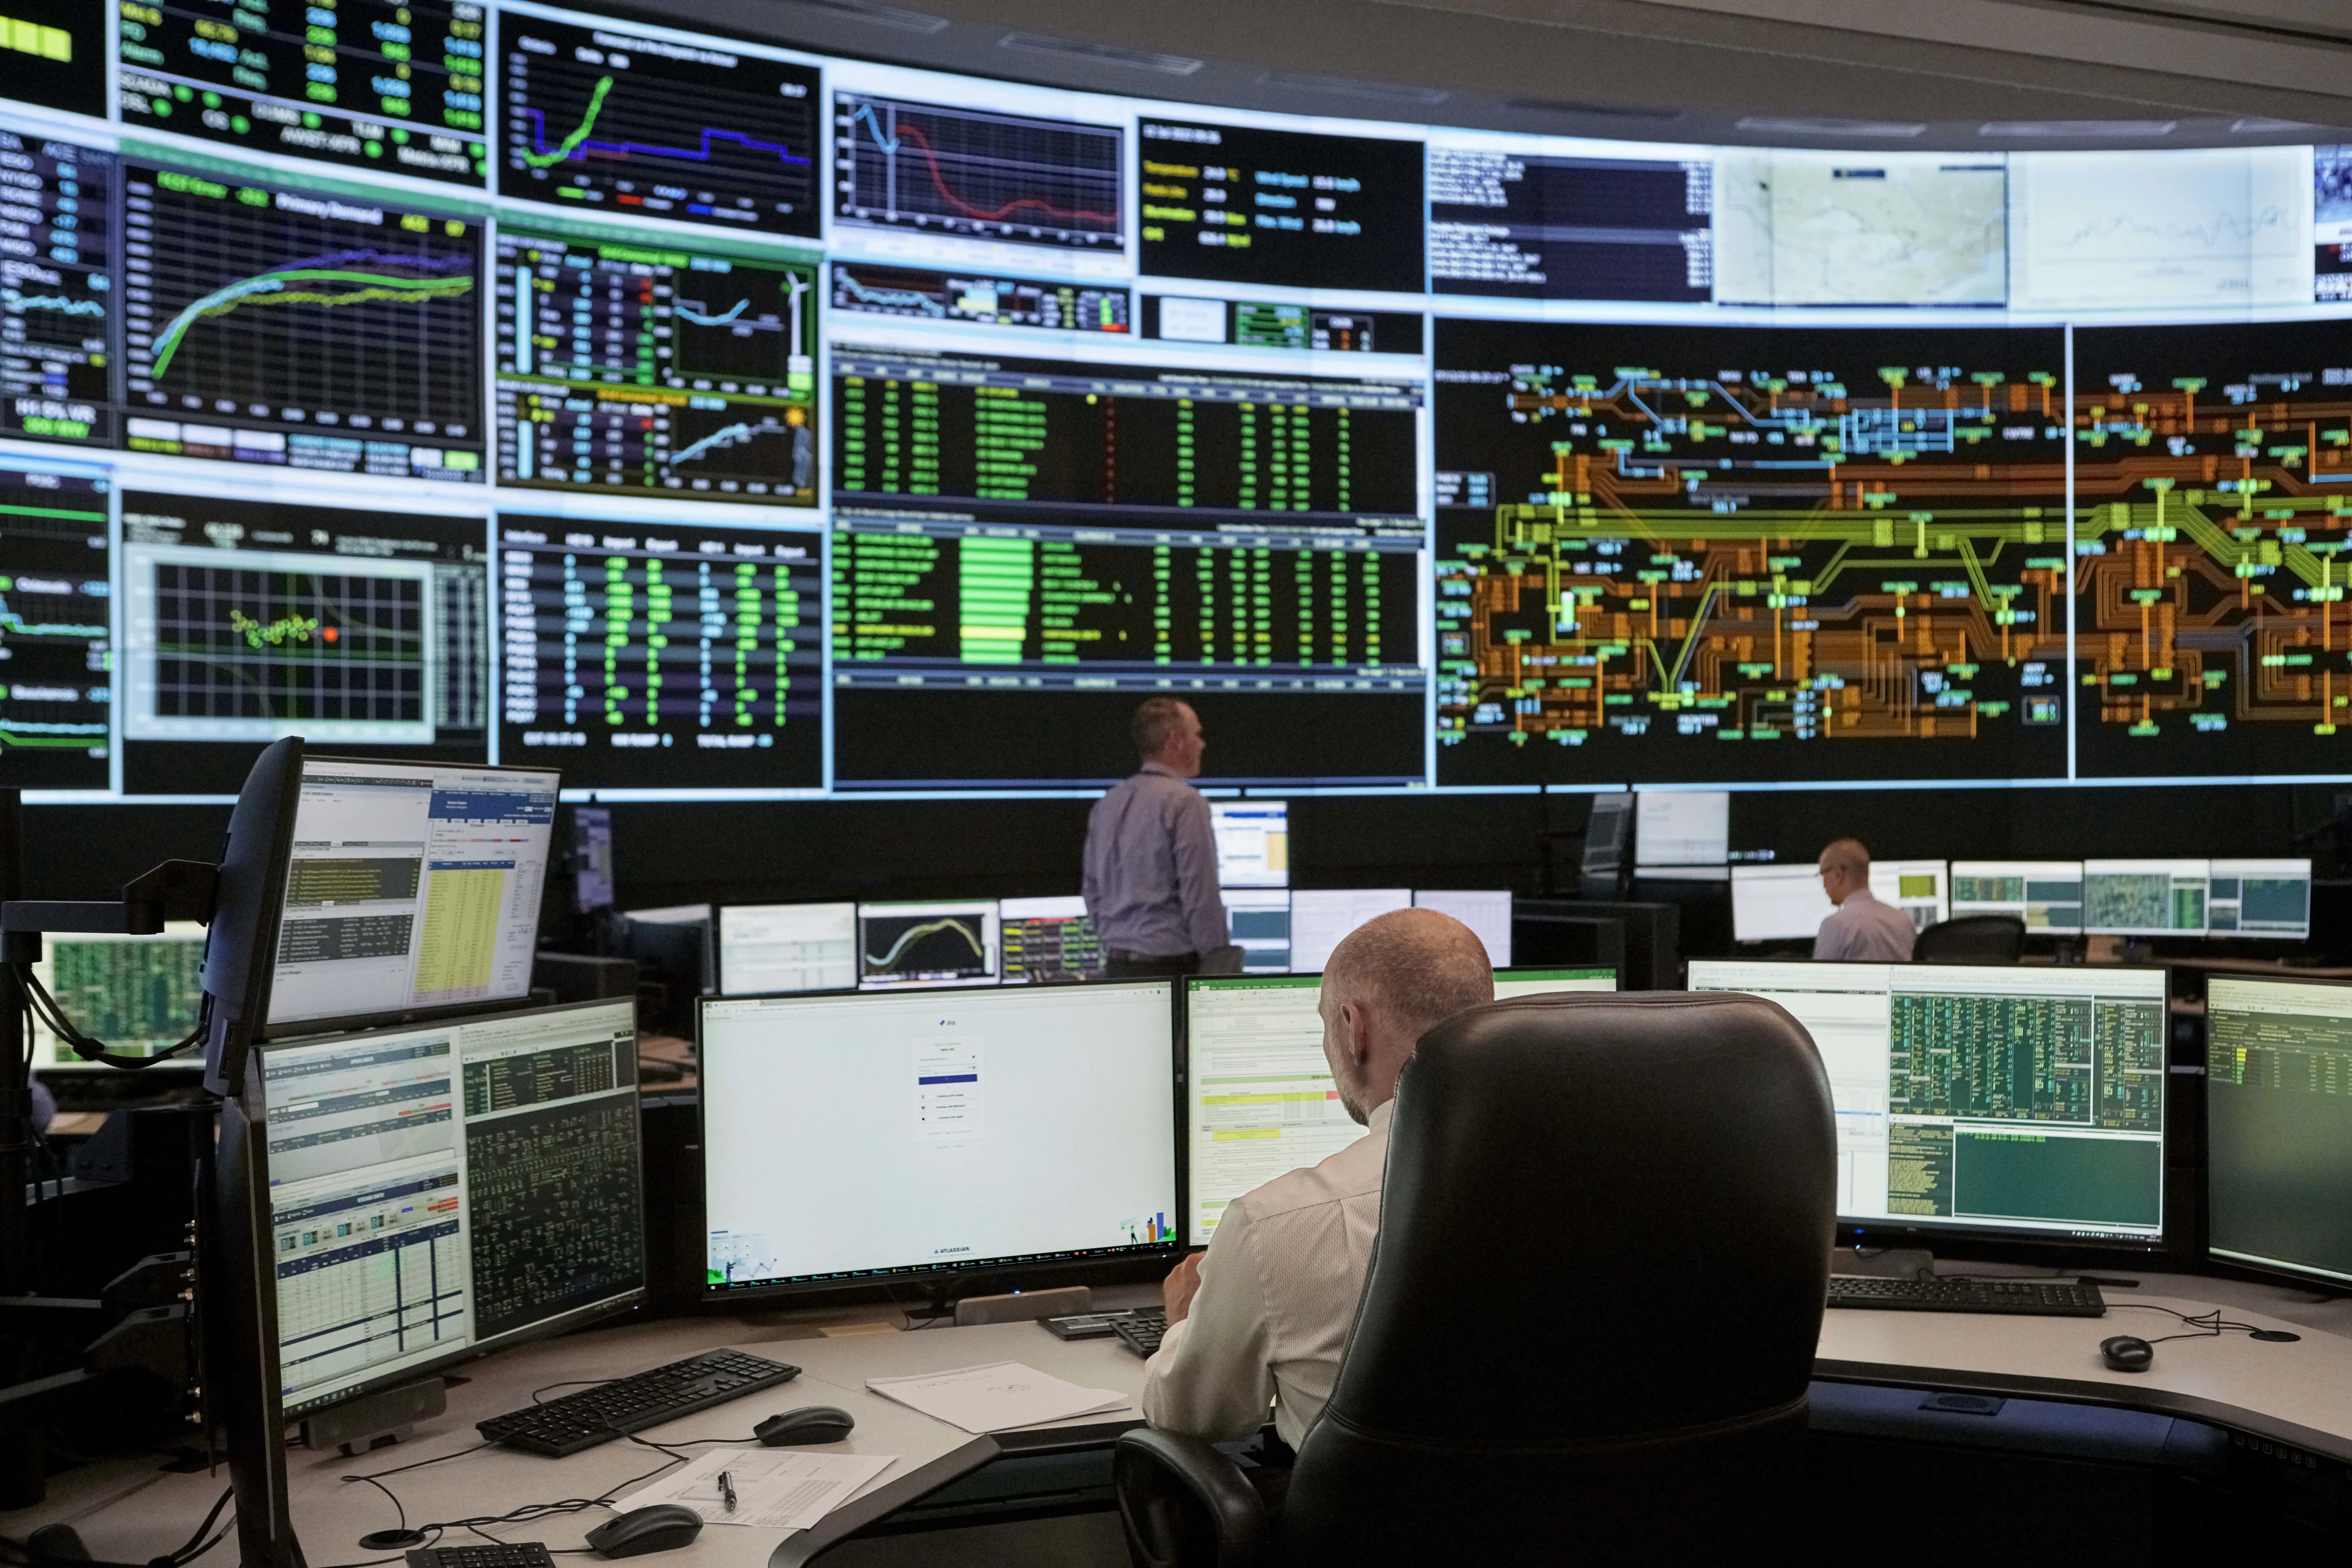 Control Room-1 IESO (Independent Electricity System Operator)